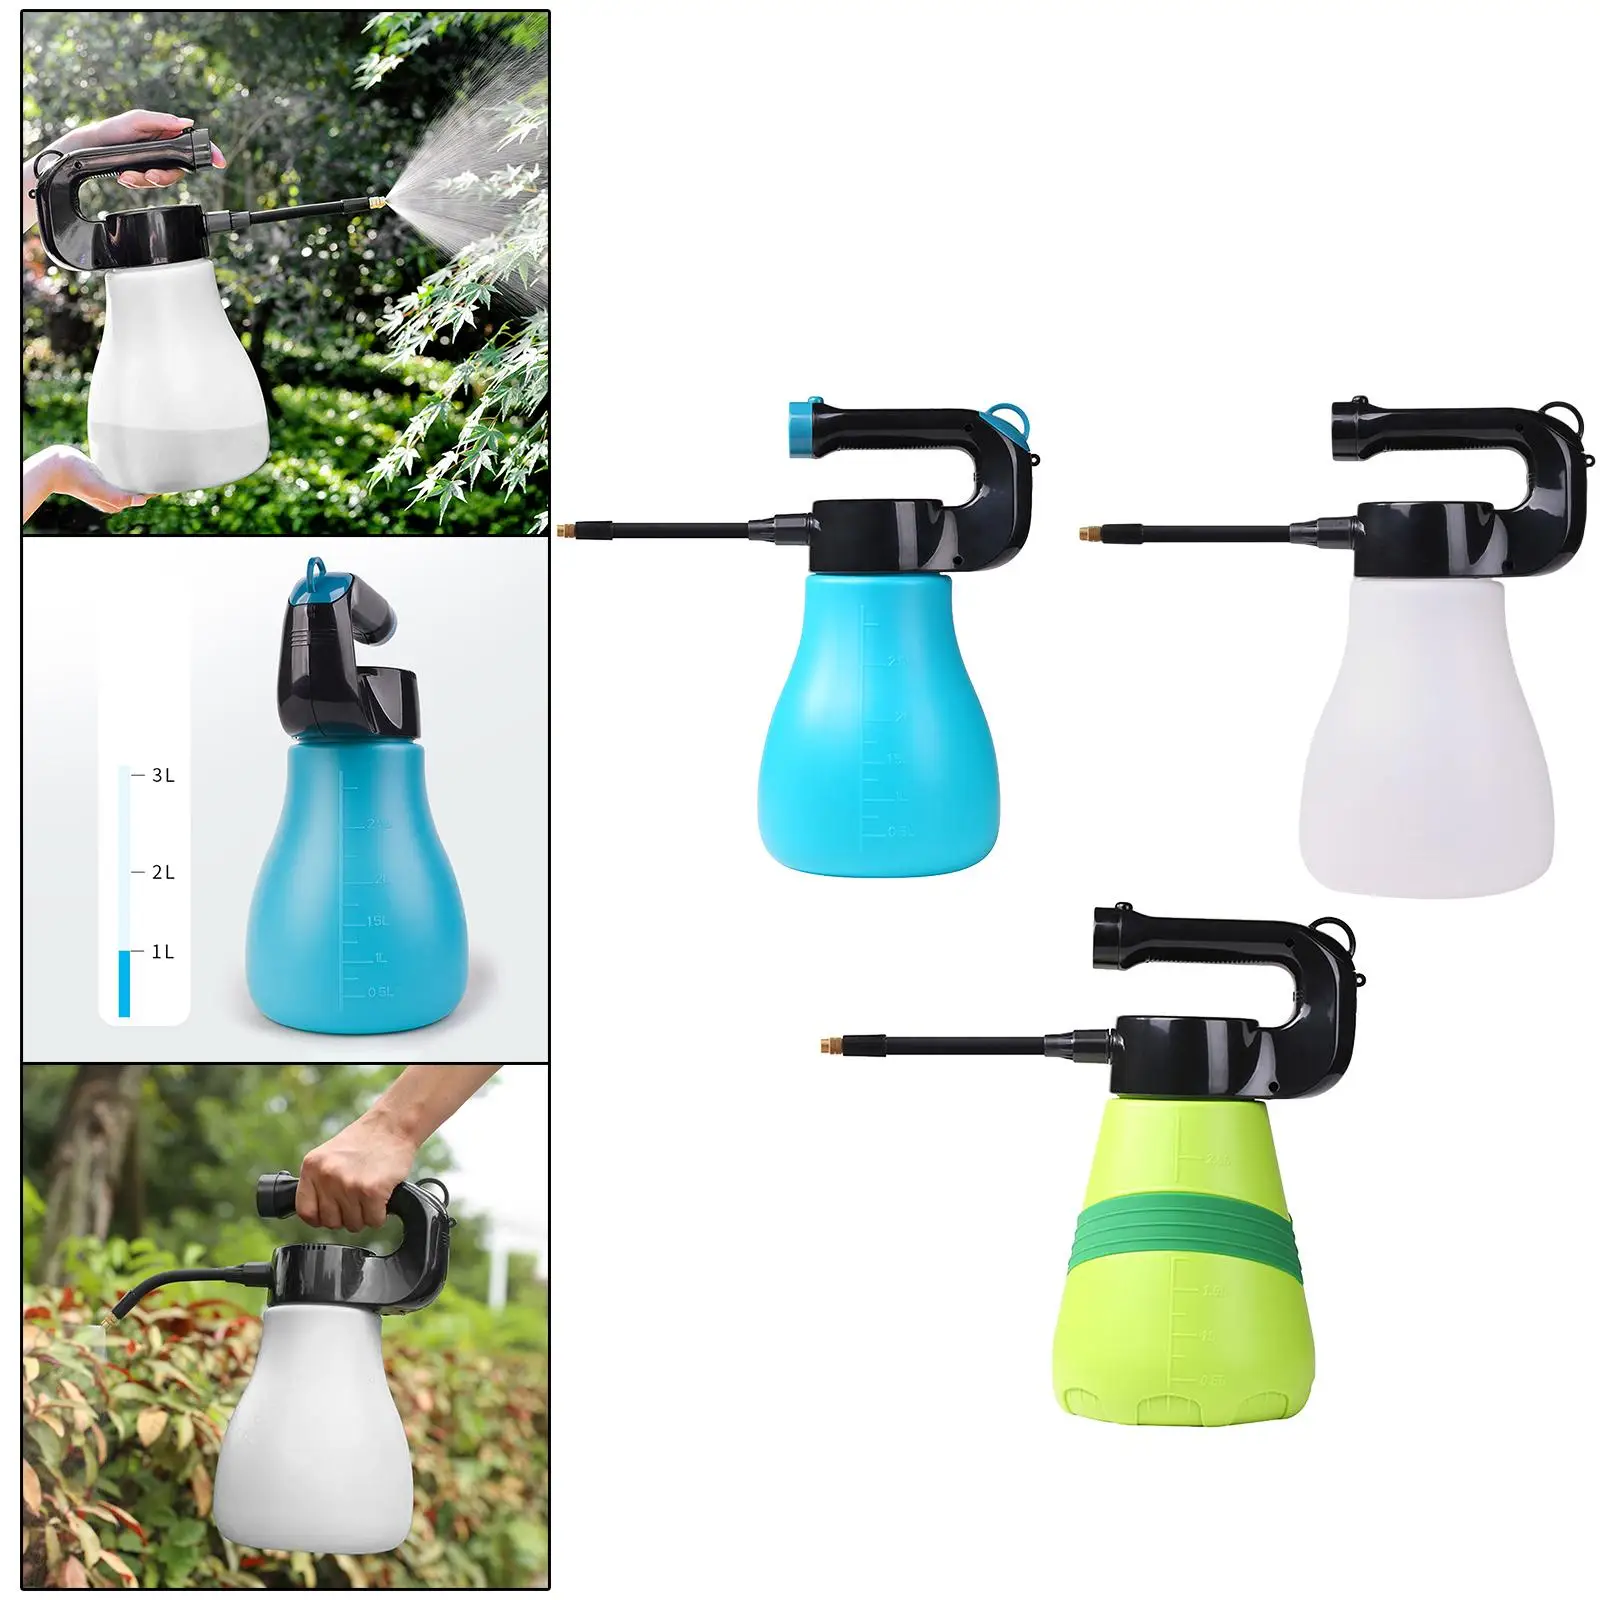 3L Electric Planter Sprayer Flower Watering Bottle Household Cleaning USB Rechargeable Garden Watering Mist Sprayer for Lawn